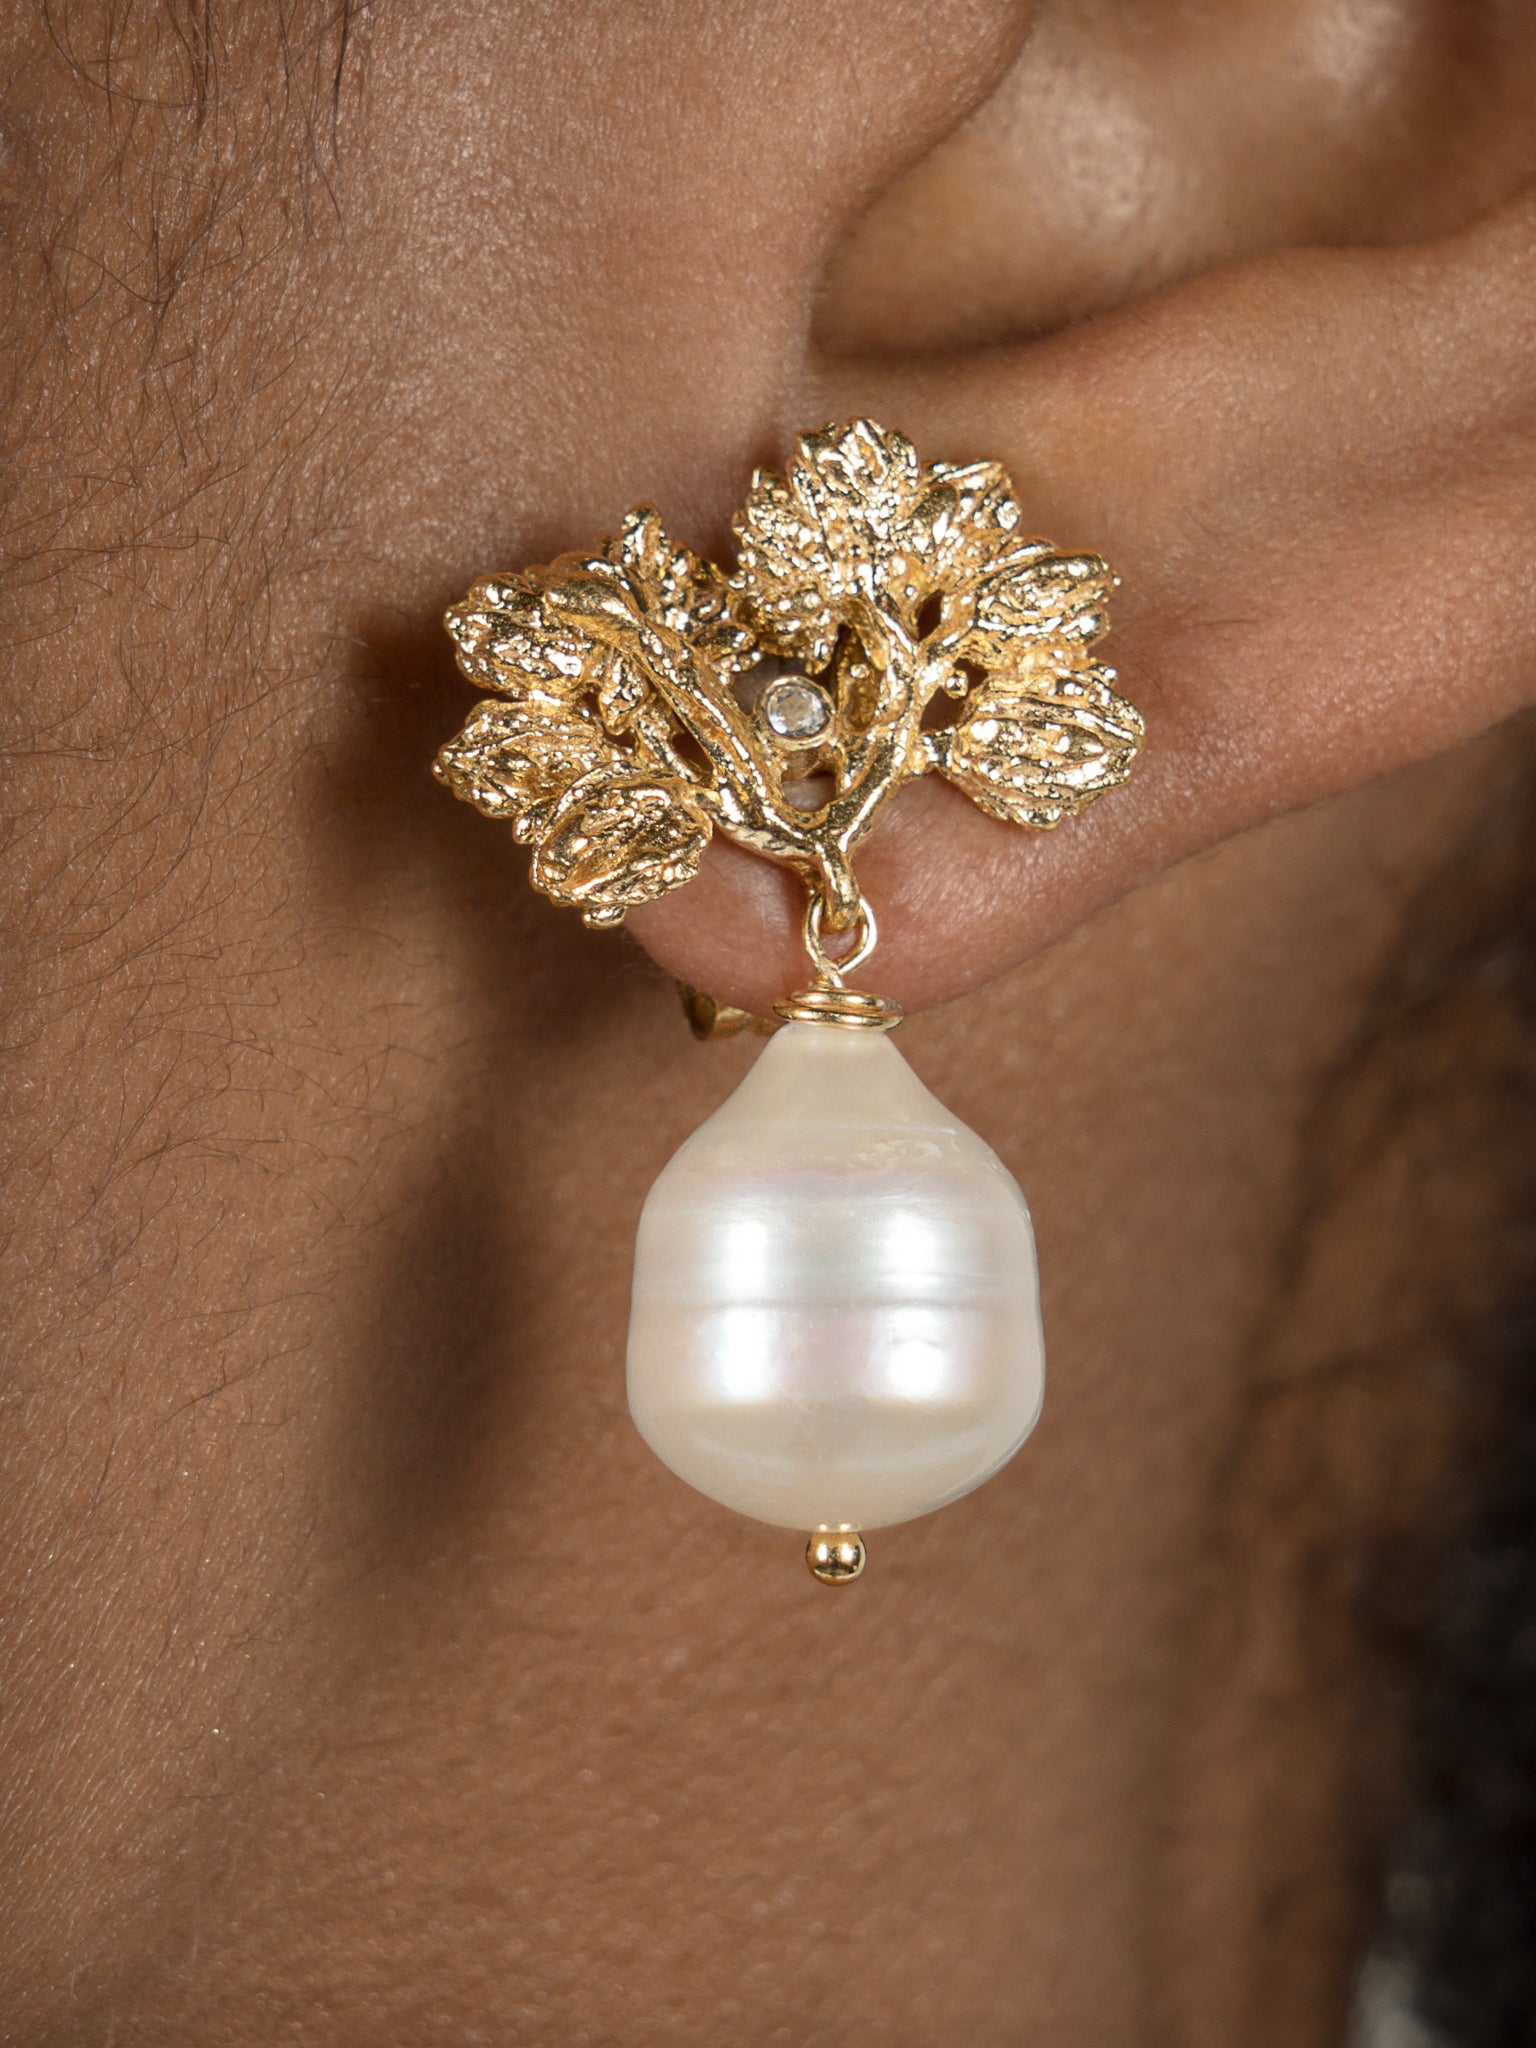 A woman's ear with the Pearly Forest Earrings GP by Cremilde Bispo Jewellery.